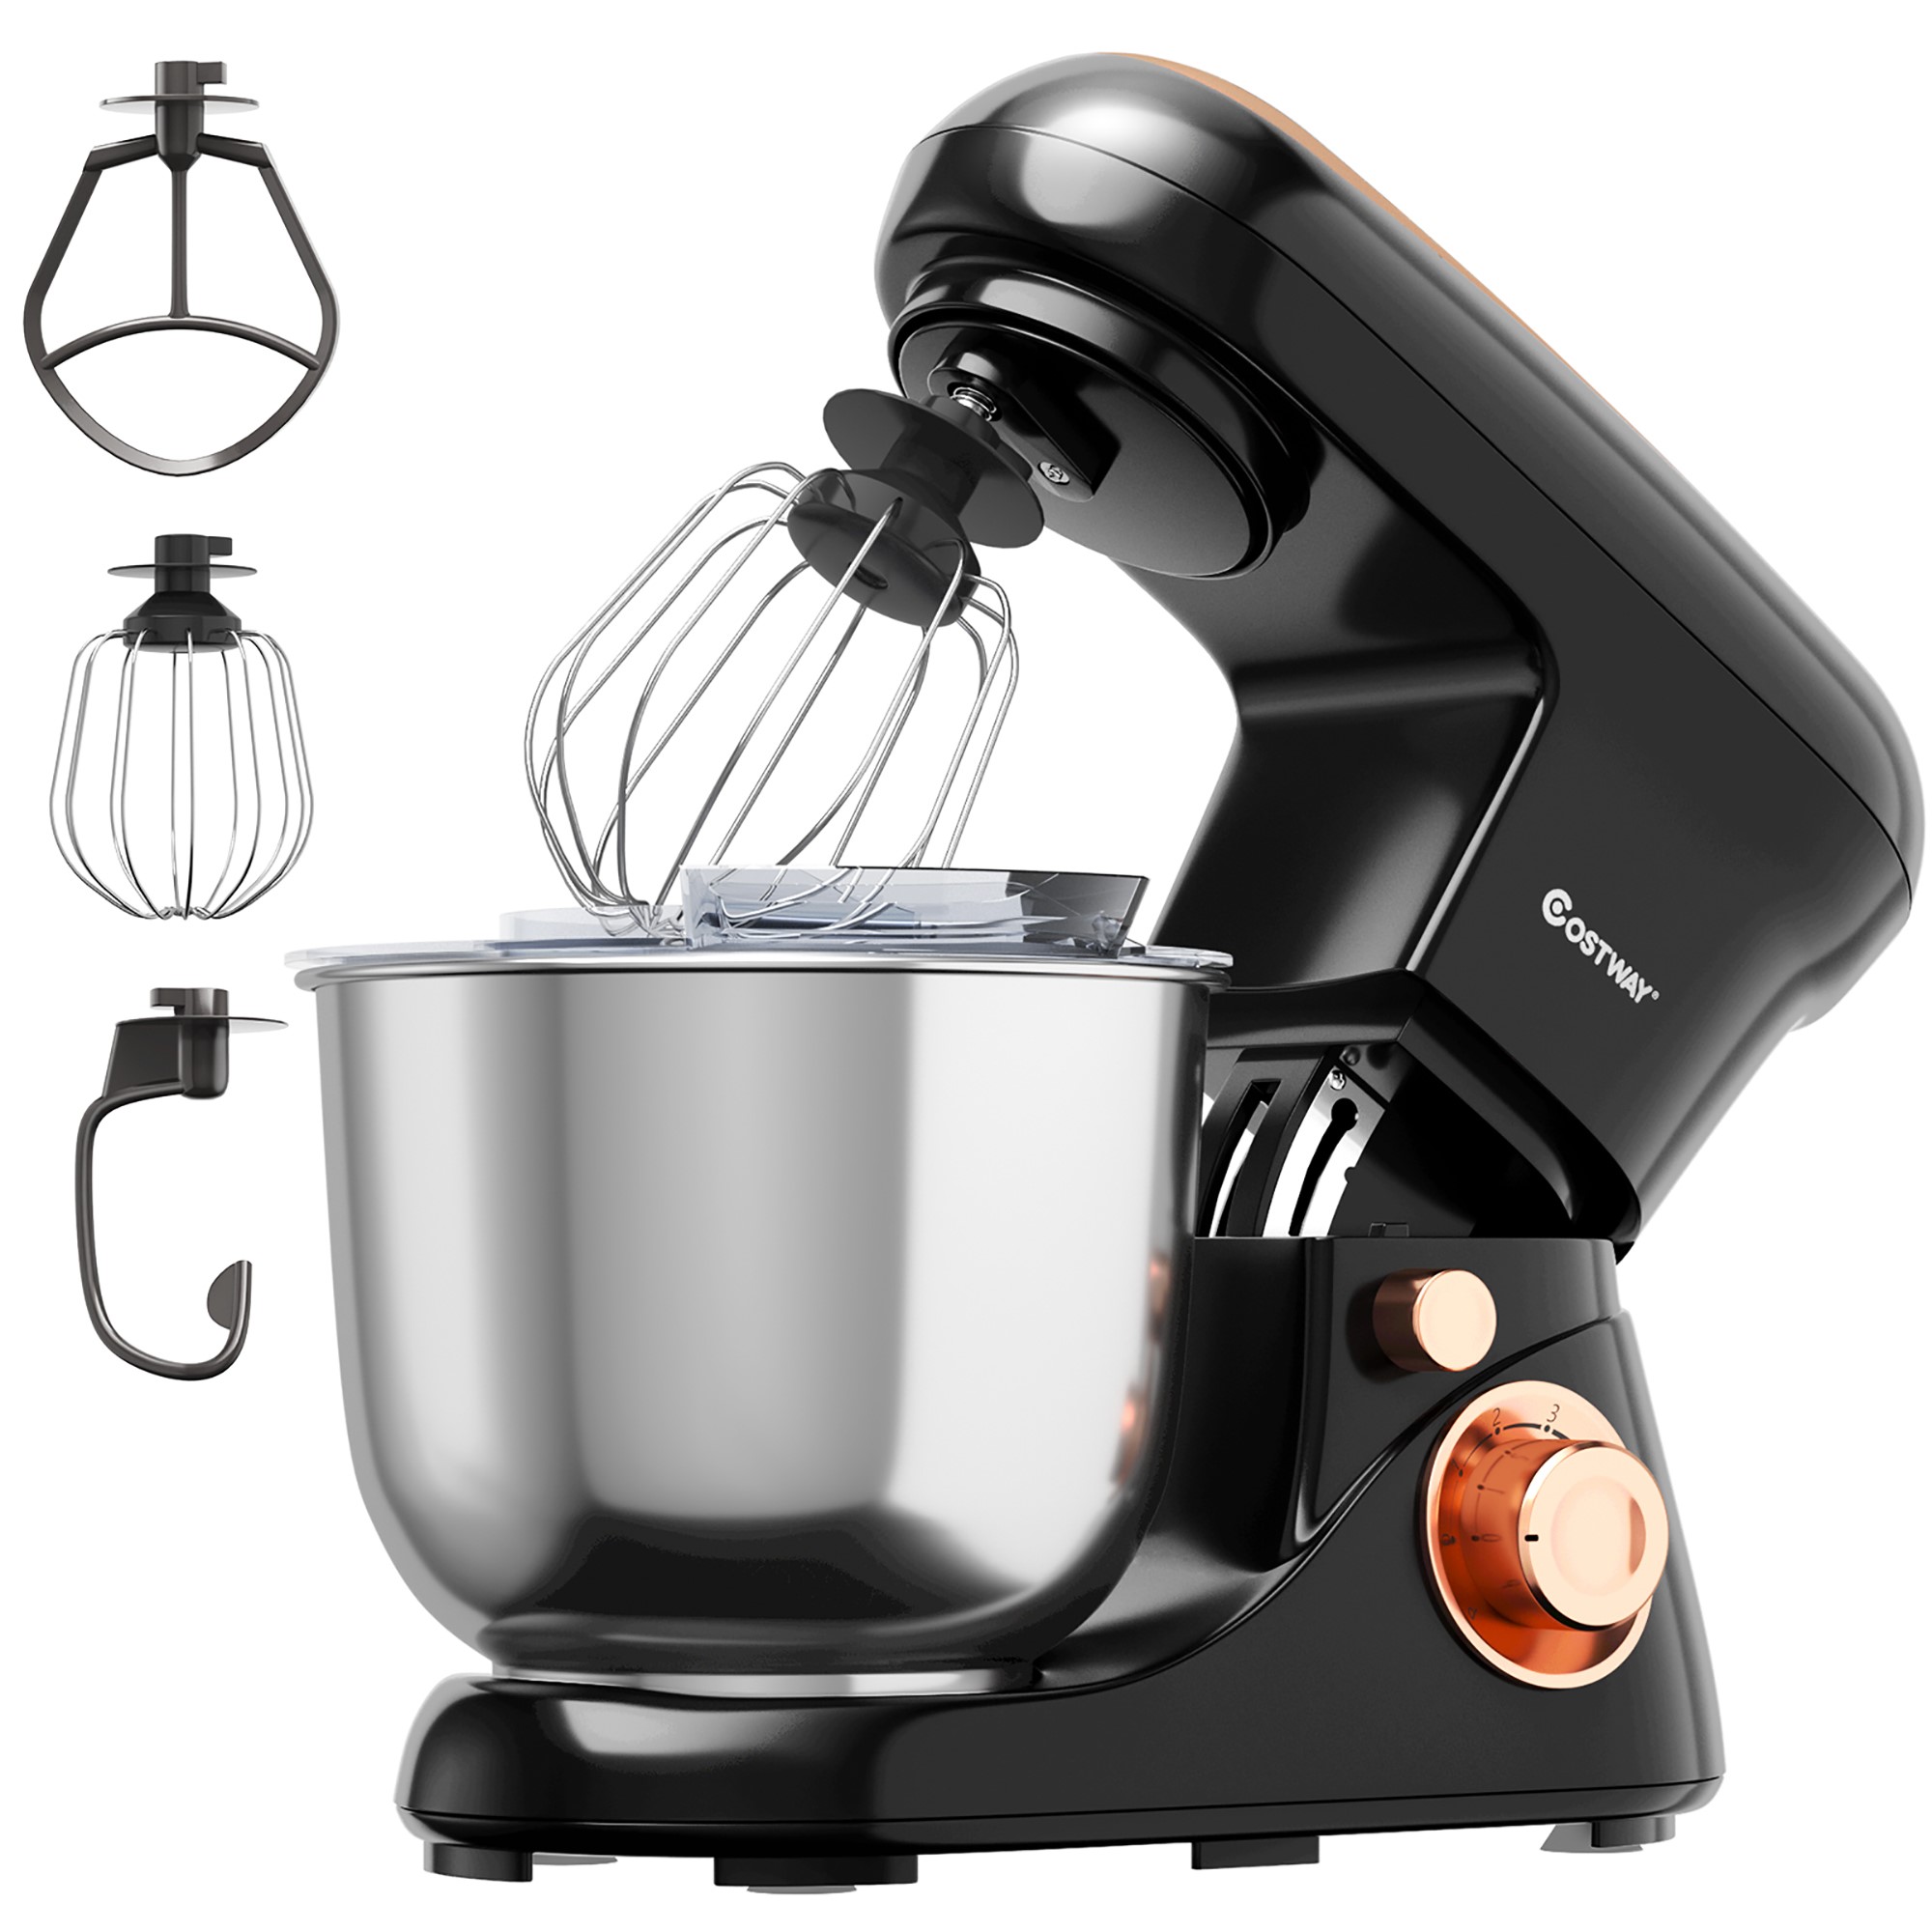 Costway Black Electric Stand Mixer with attachments.